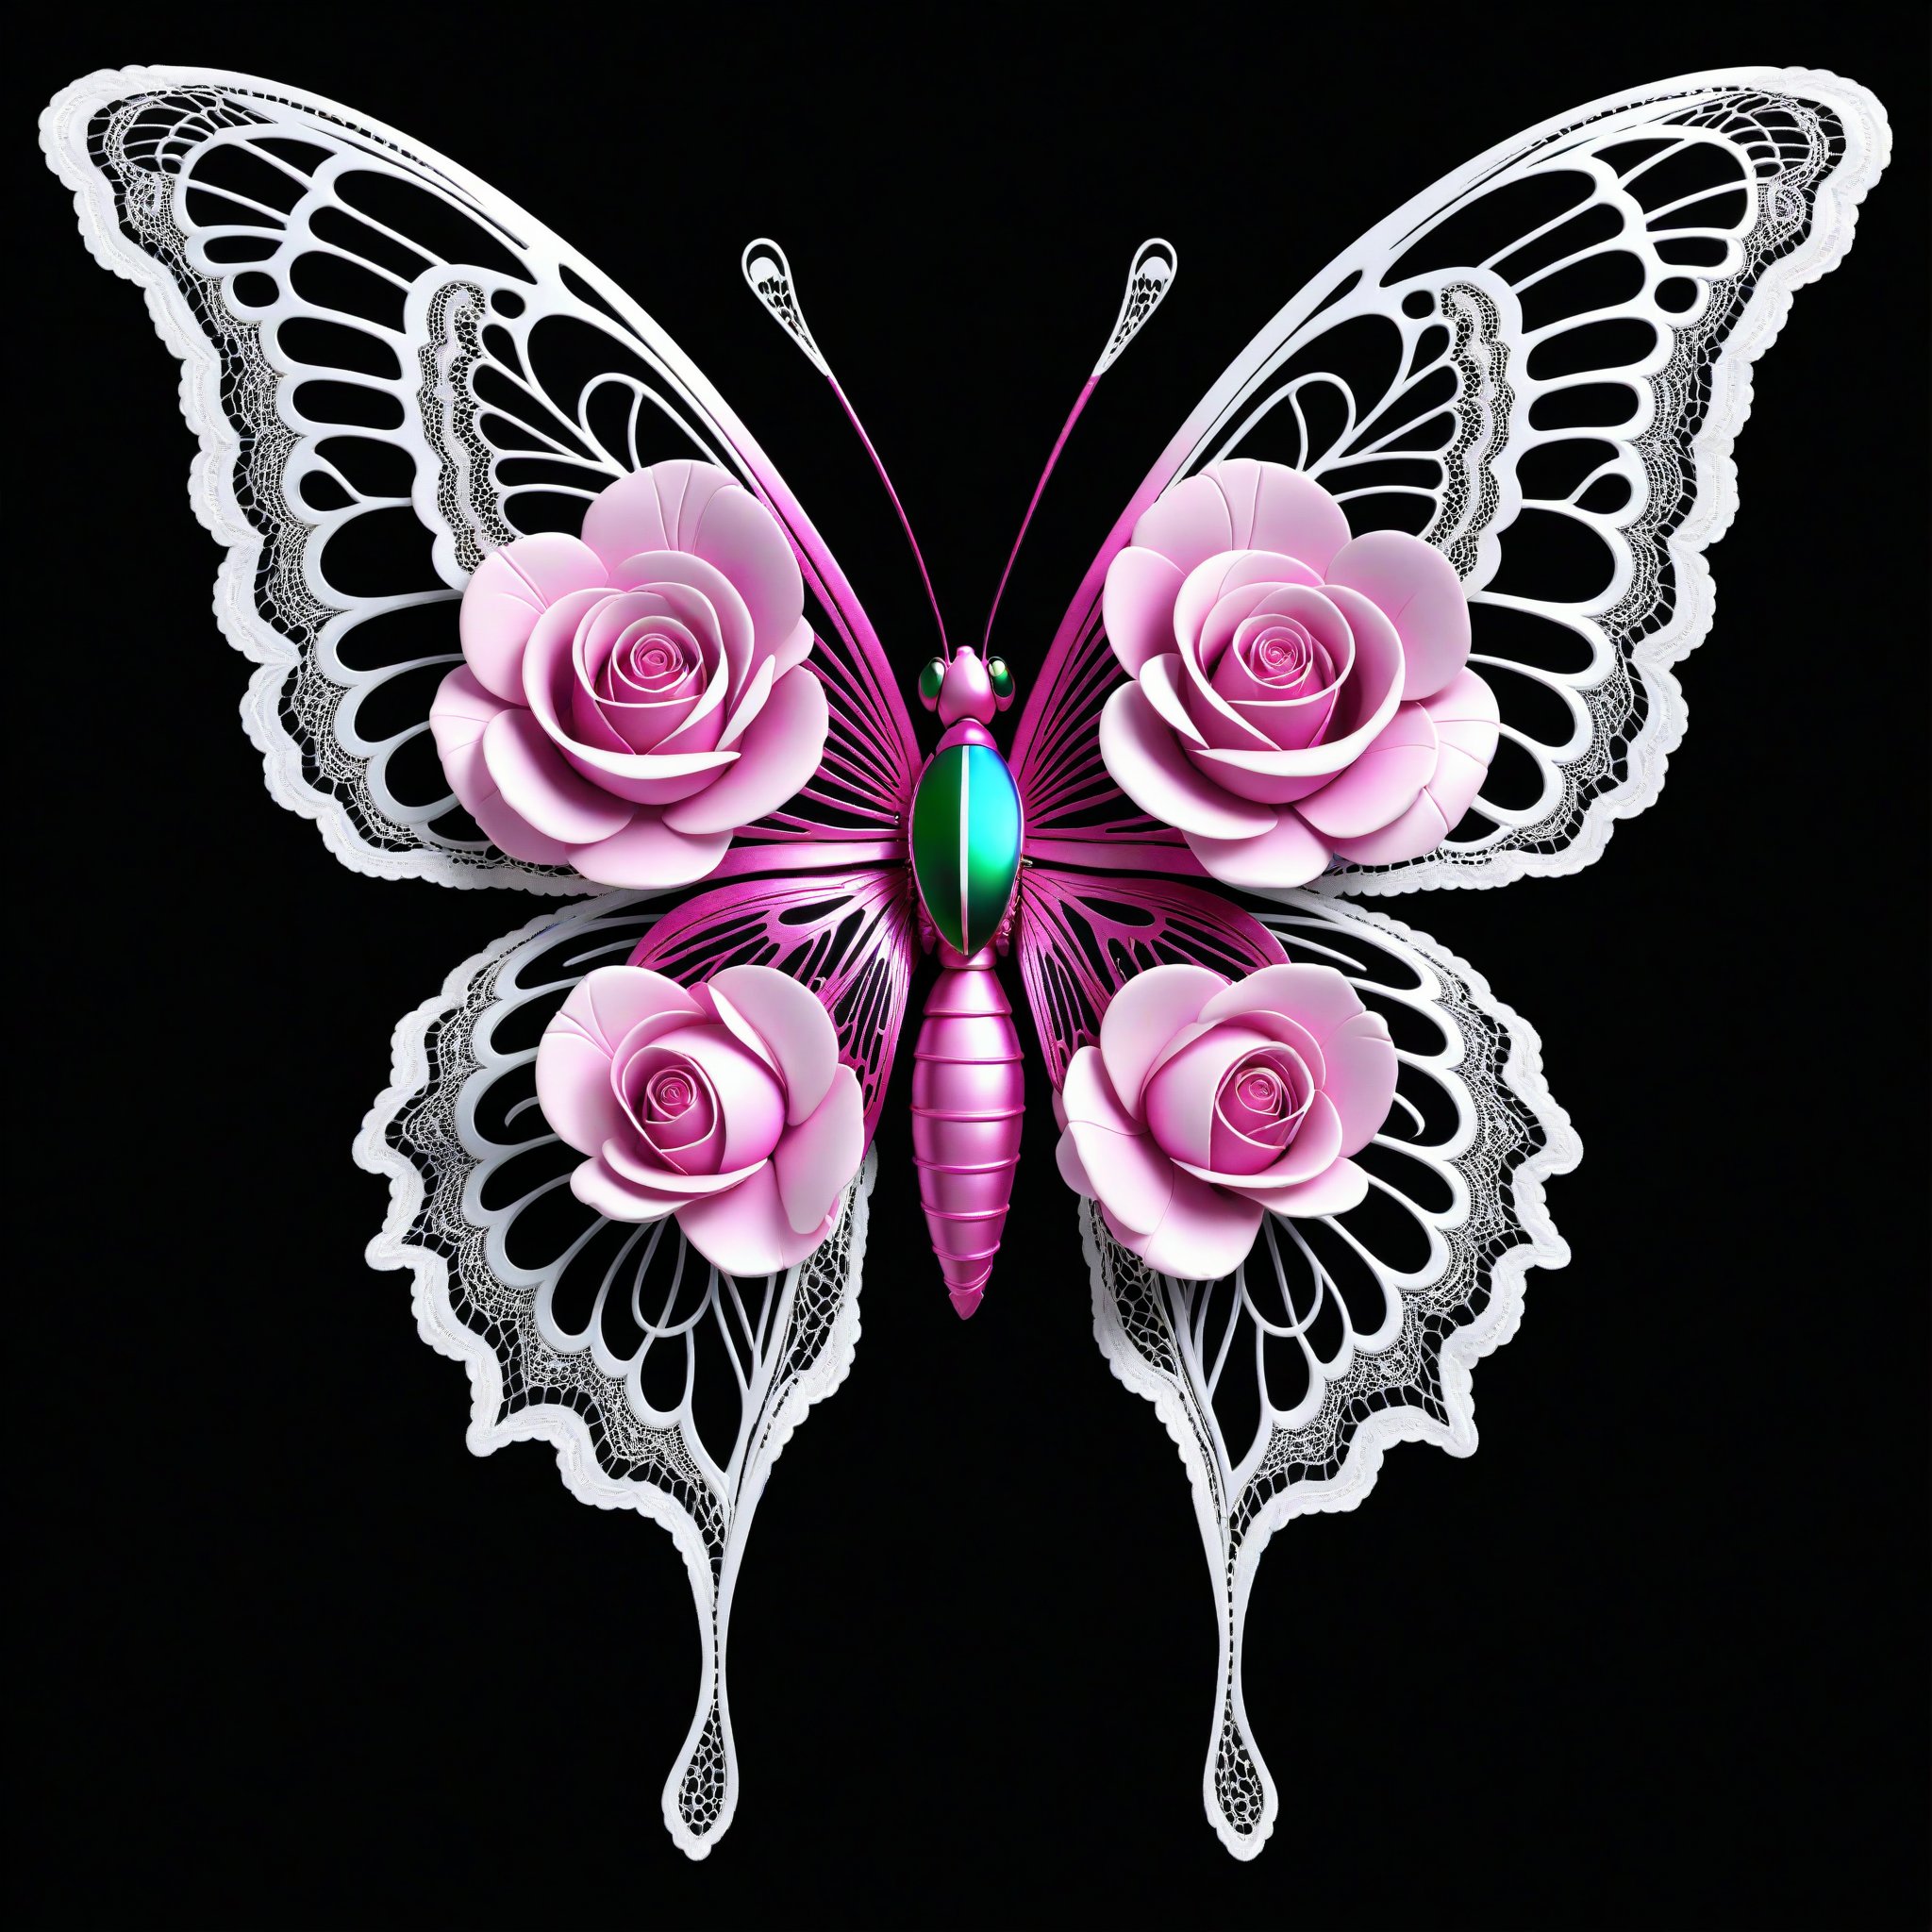 a butterfly iridicent pink whit lace bows roses elegant, clasic ornament Mechanical lines Elegance T-shirt design, BLACK BACKGROUND